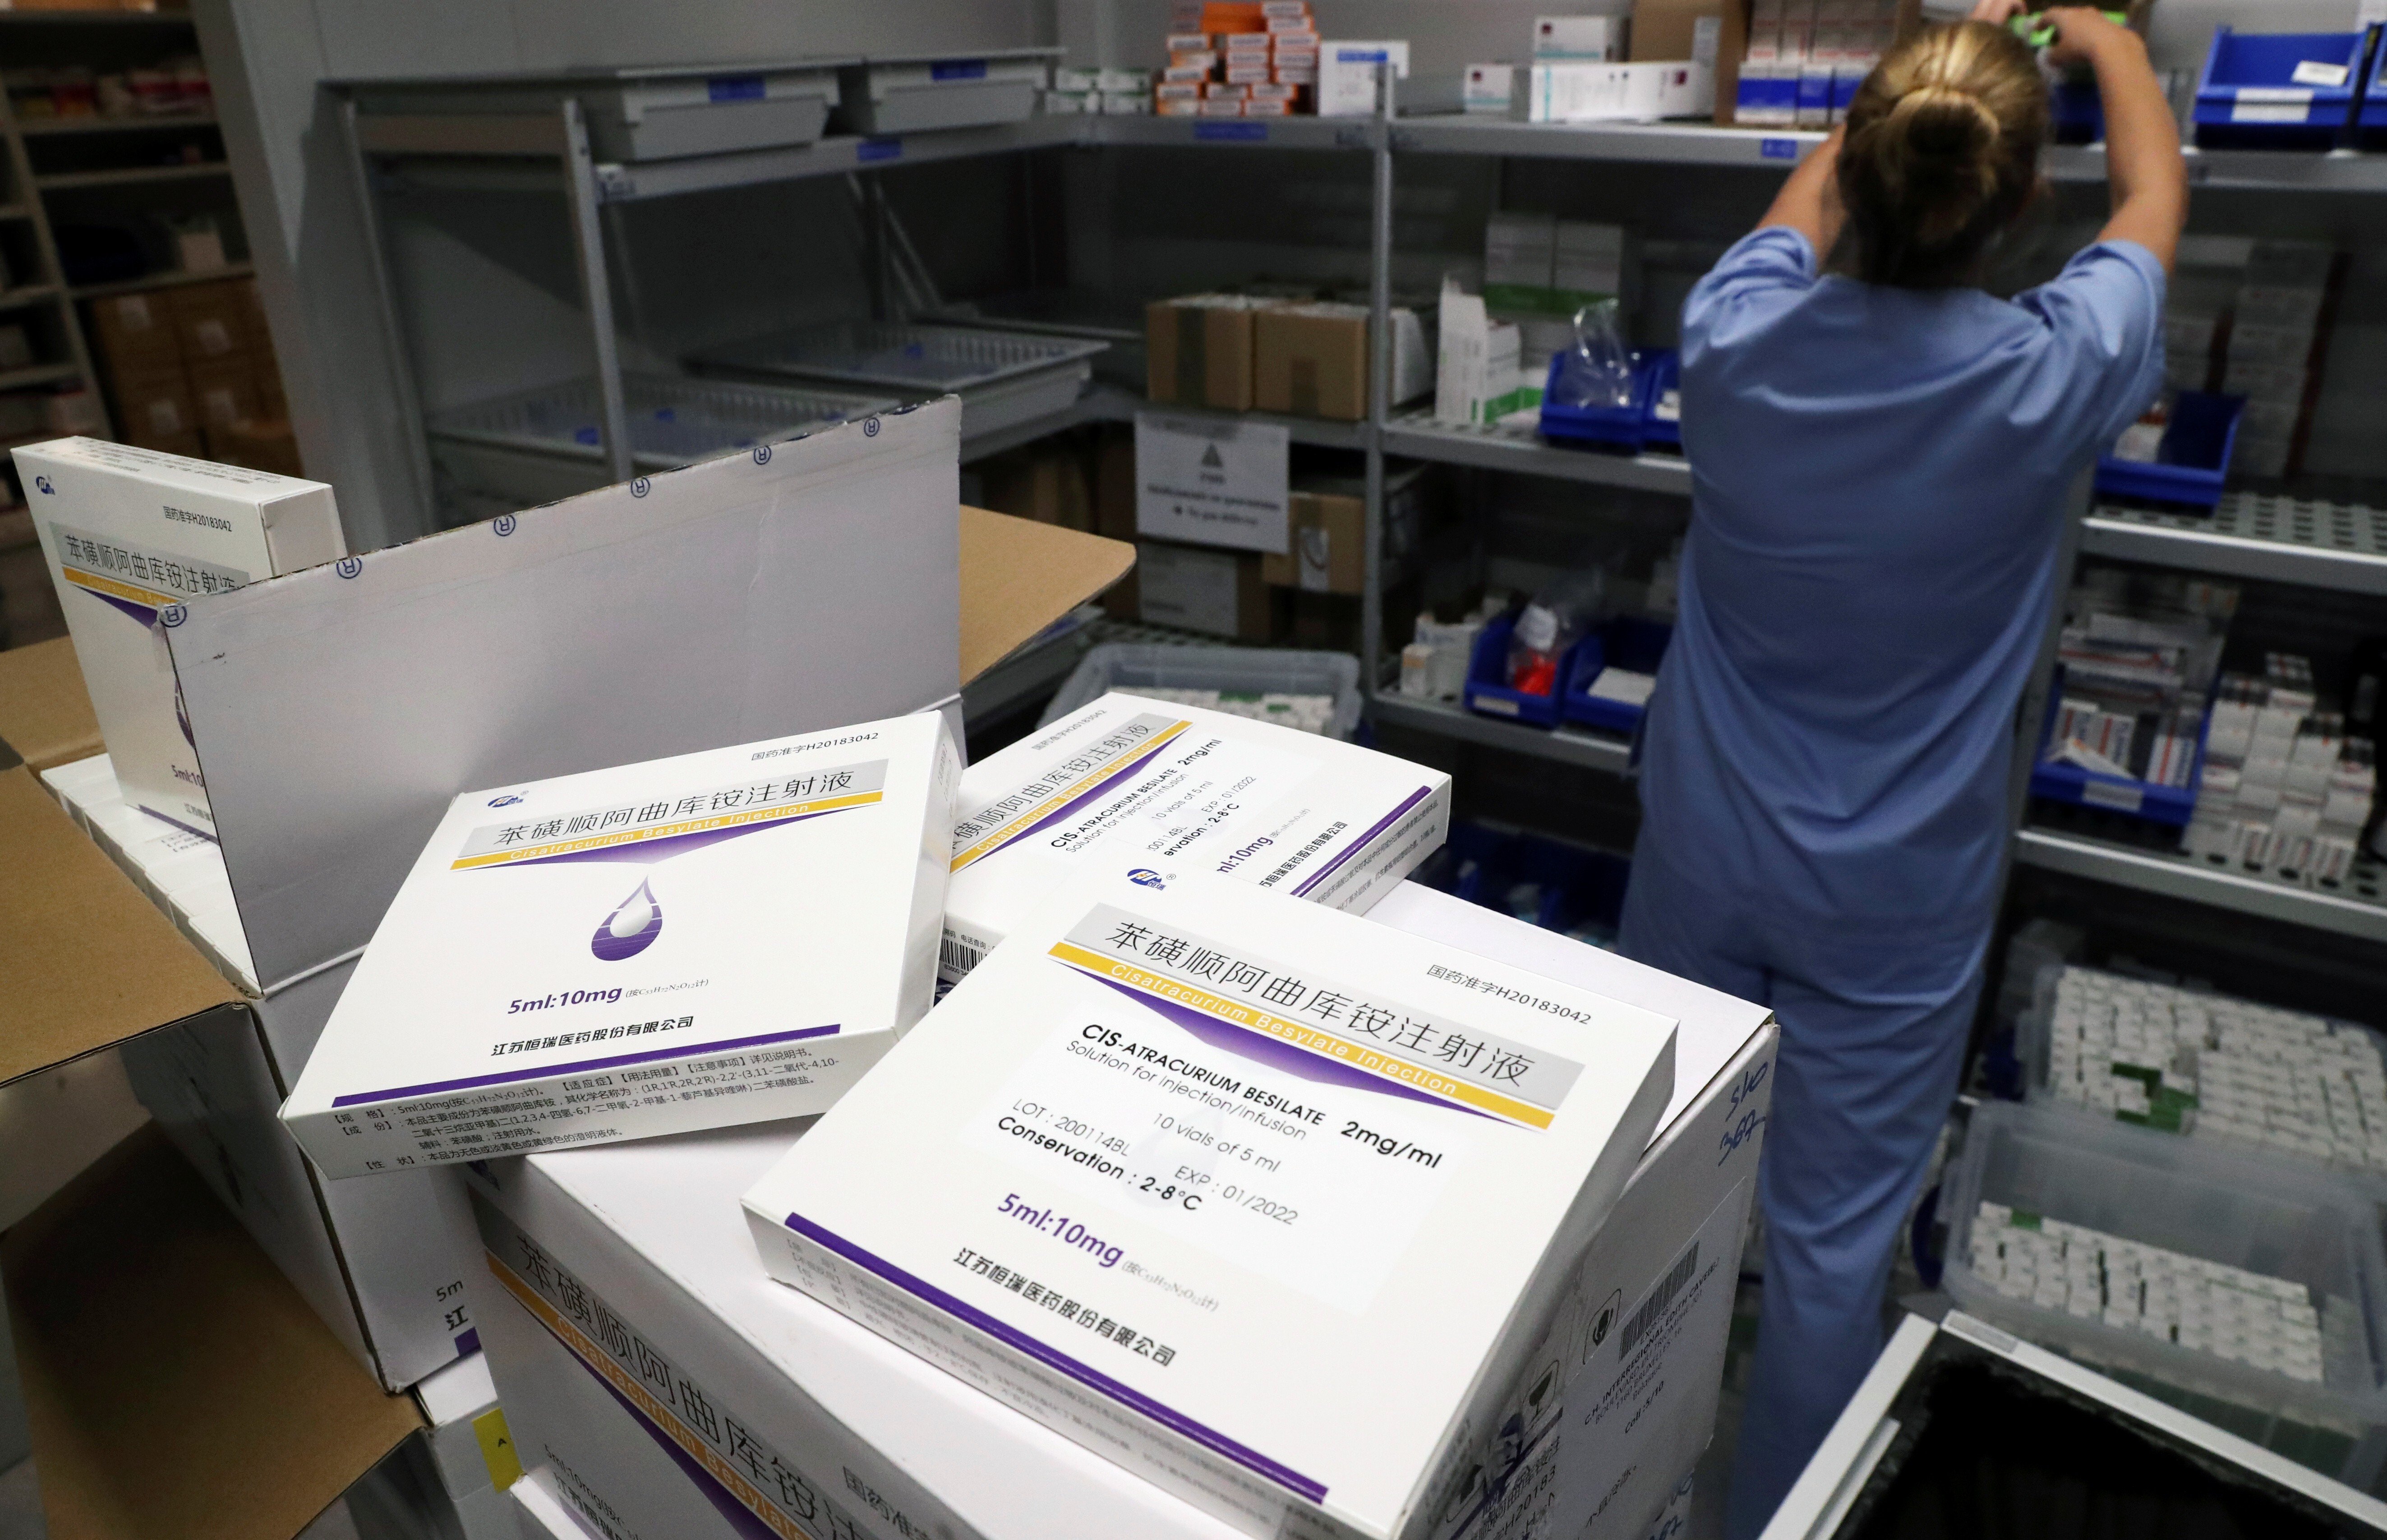 The United States is heavily reliant on imported medicines from China, something both US President Donald Trump and Democratic nominee Joe Biden have vowed to address after the coronavirus pandemic exposed vulnerabilities in the nation’s pharmaceutical and medical device supply. Photo: Reuters